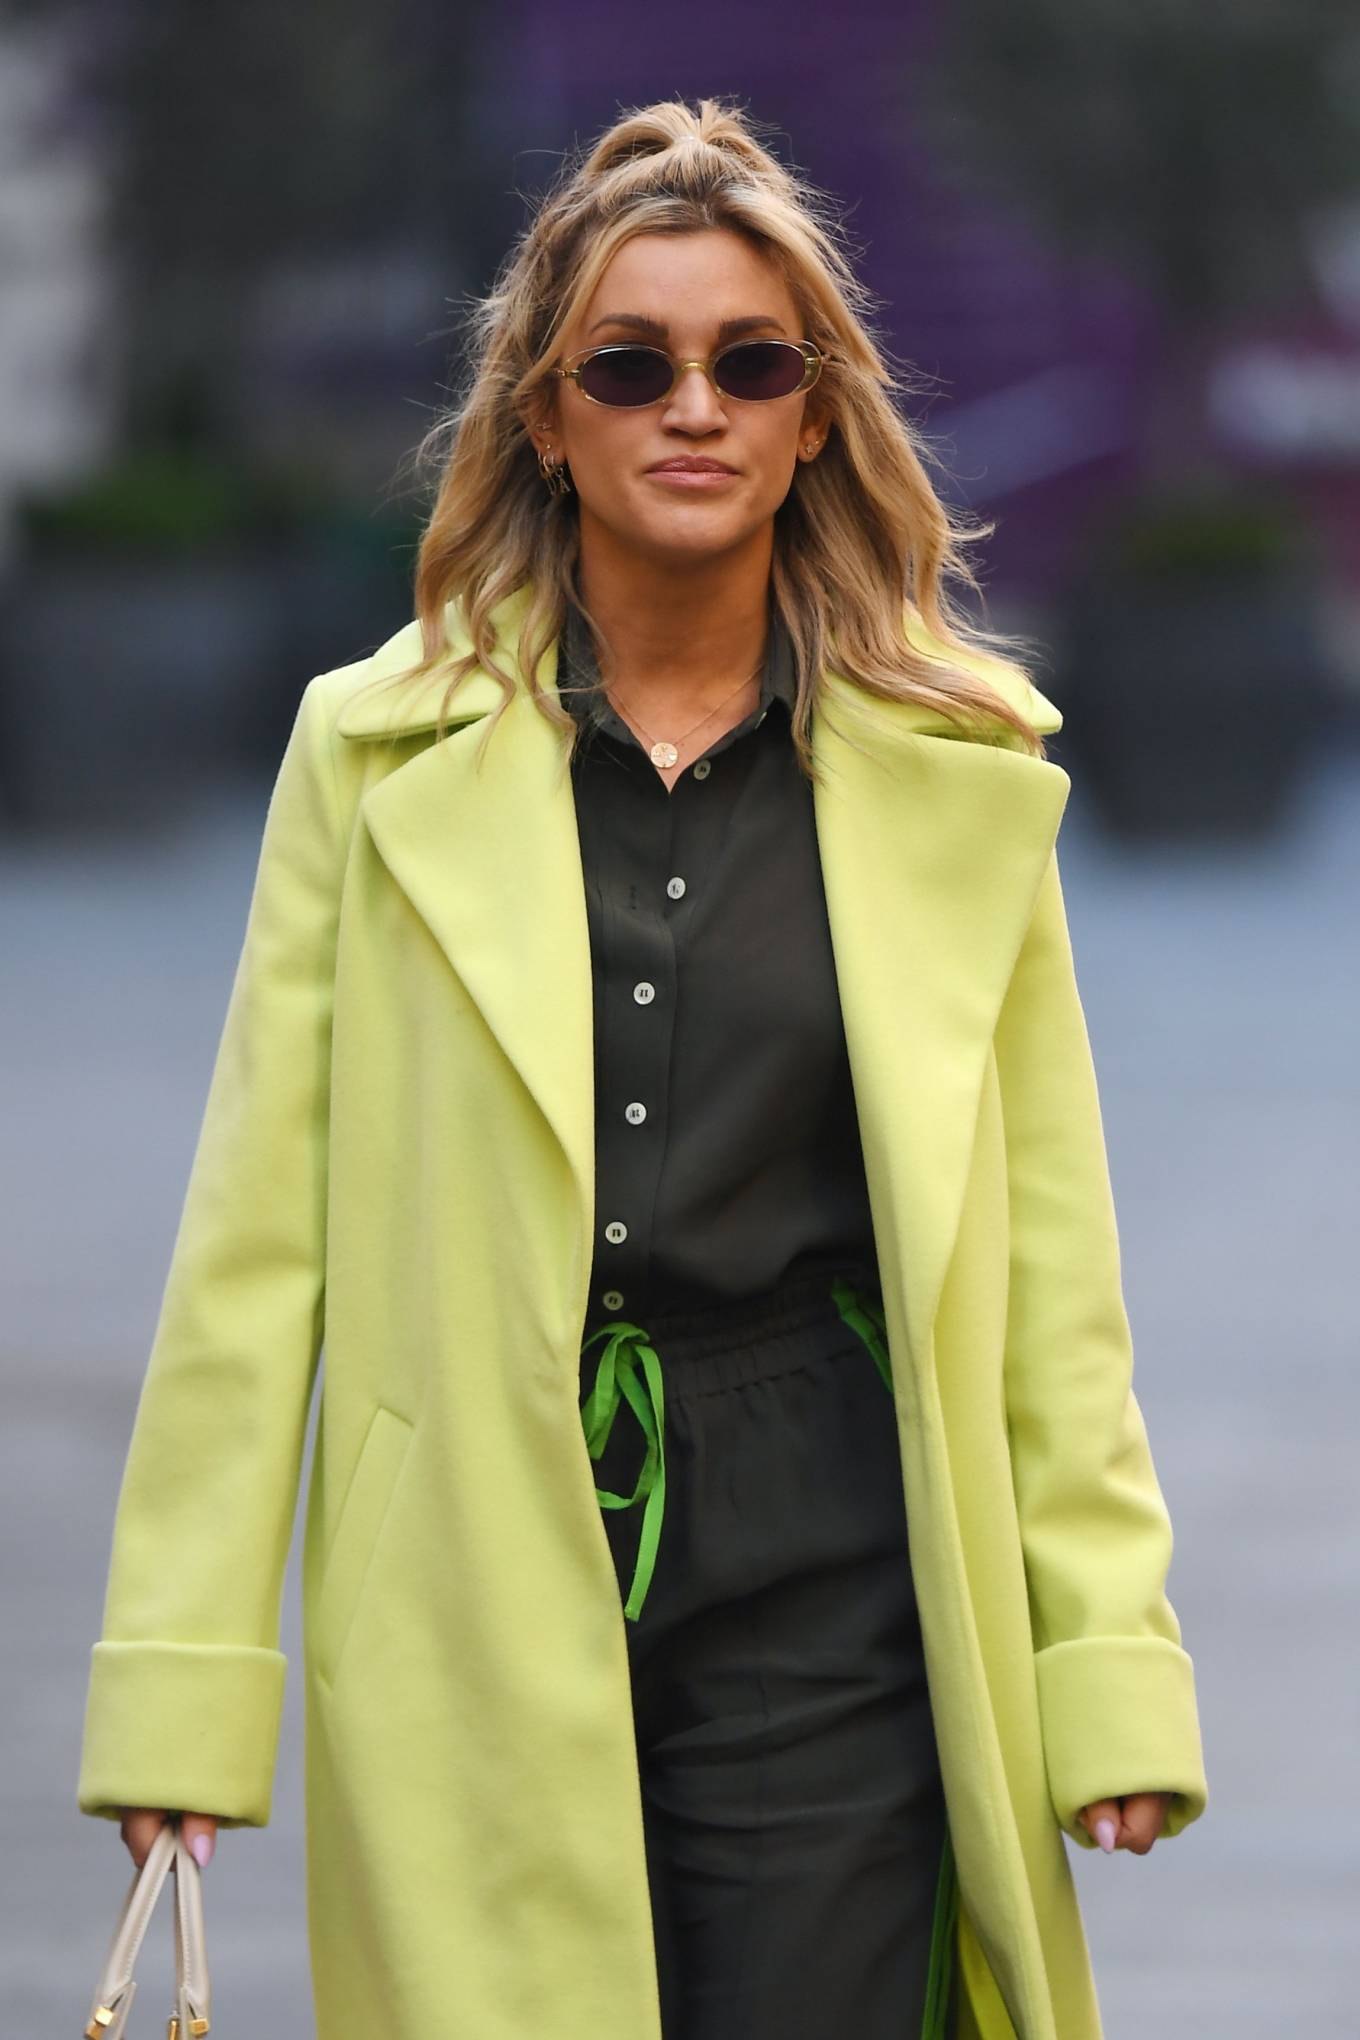 Ashley Roberts 2021 : Ashley Roberts – In a lime green trench coat at Heart radio in London-33